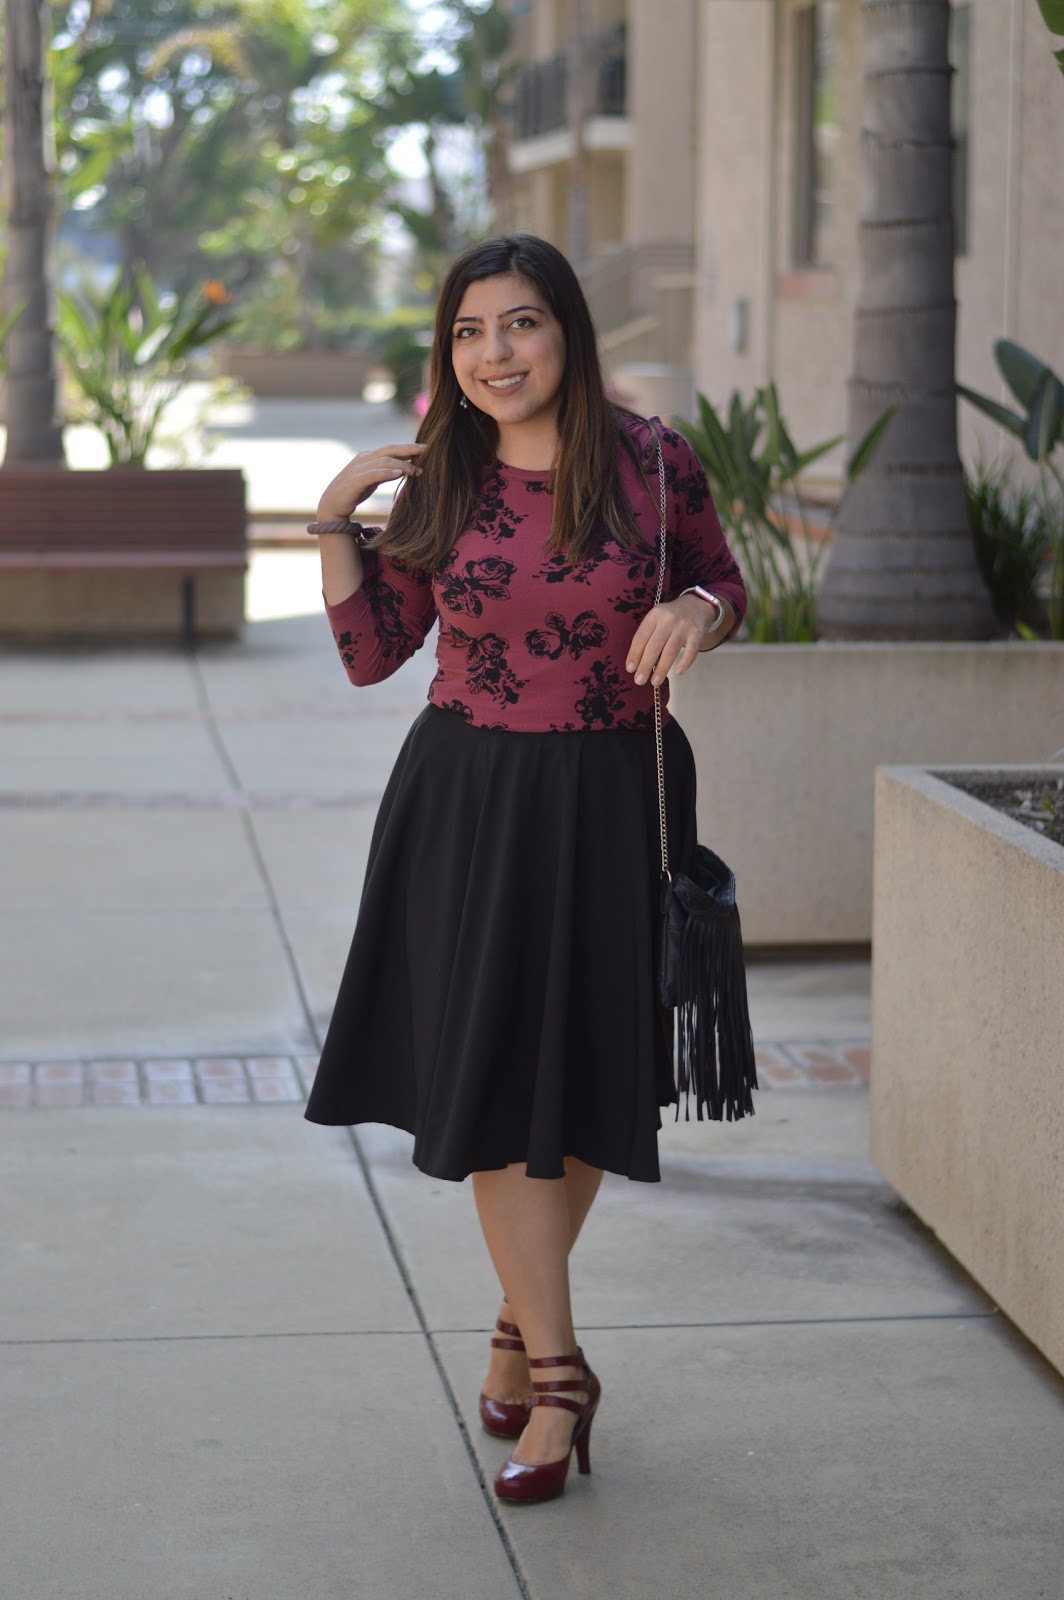 Business Casual - The Interview Dinner Skirt from MakeMeChic - PhD ...